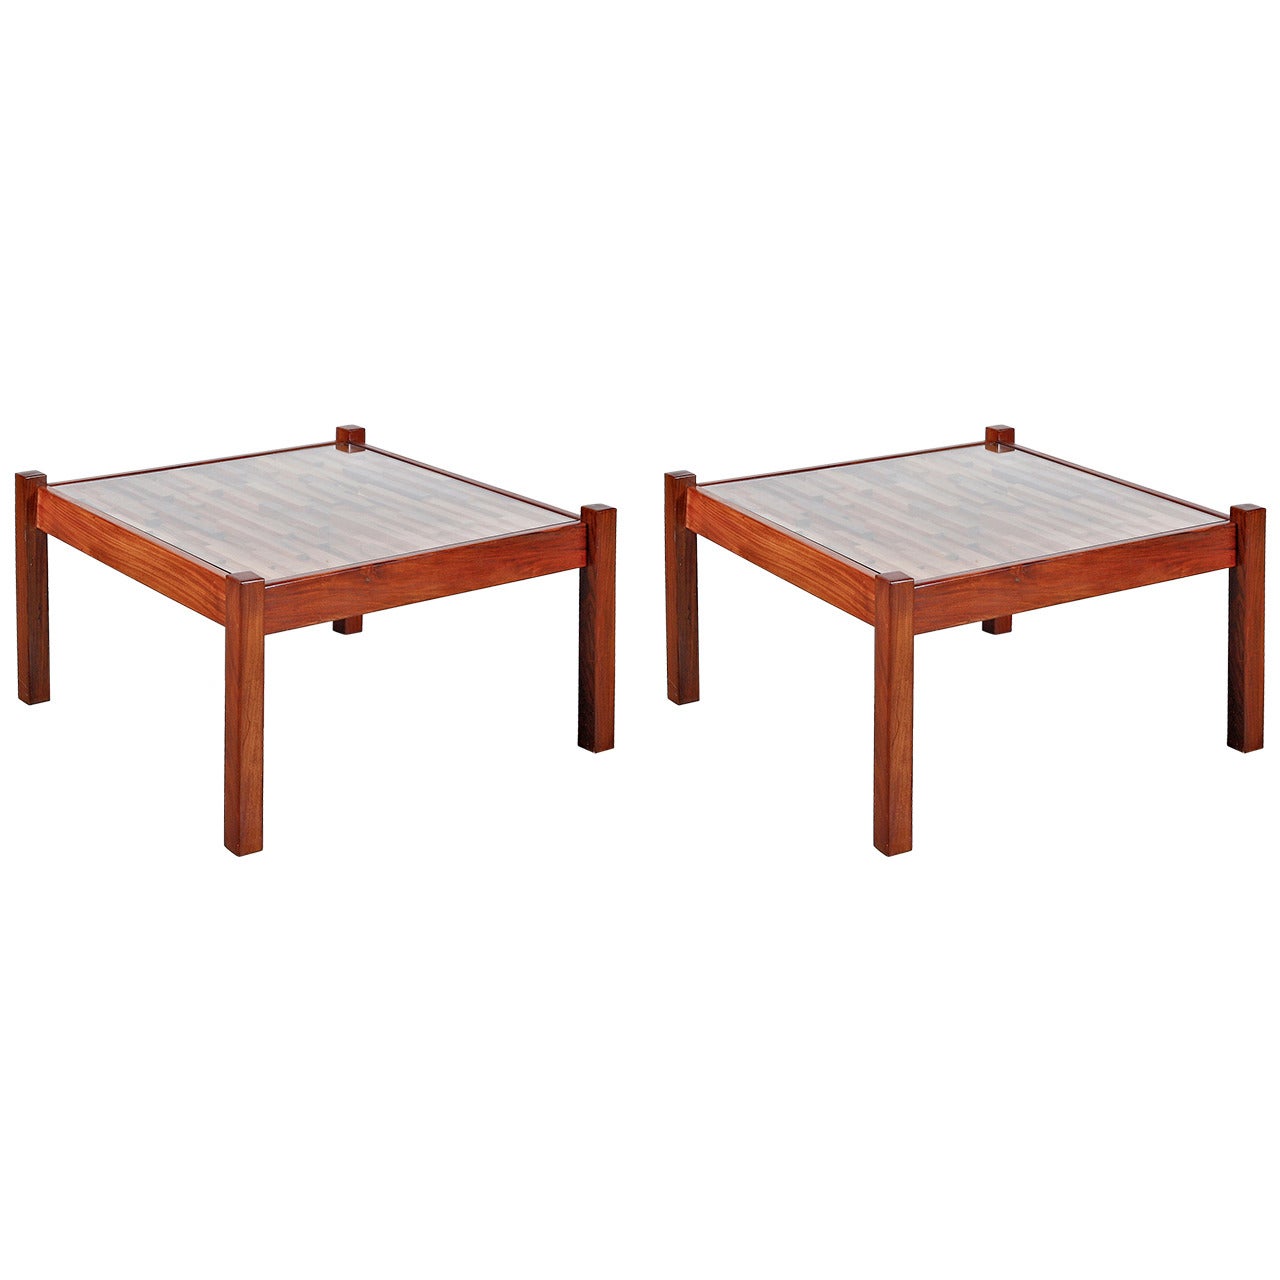 Percival Lafer Pair of Coffee Tables, circa 1960 For Sale